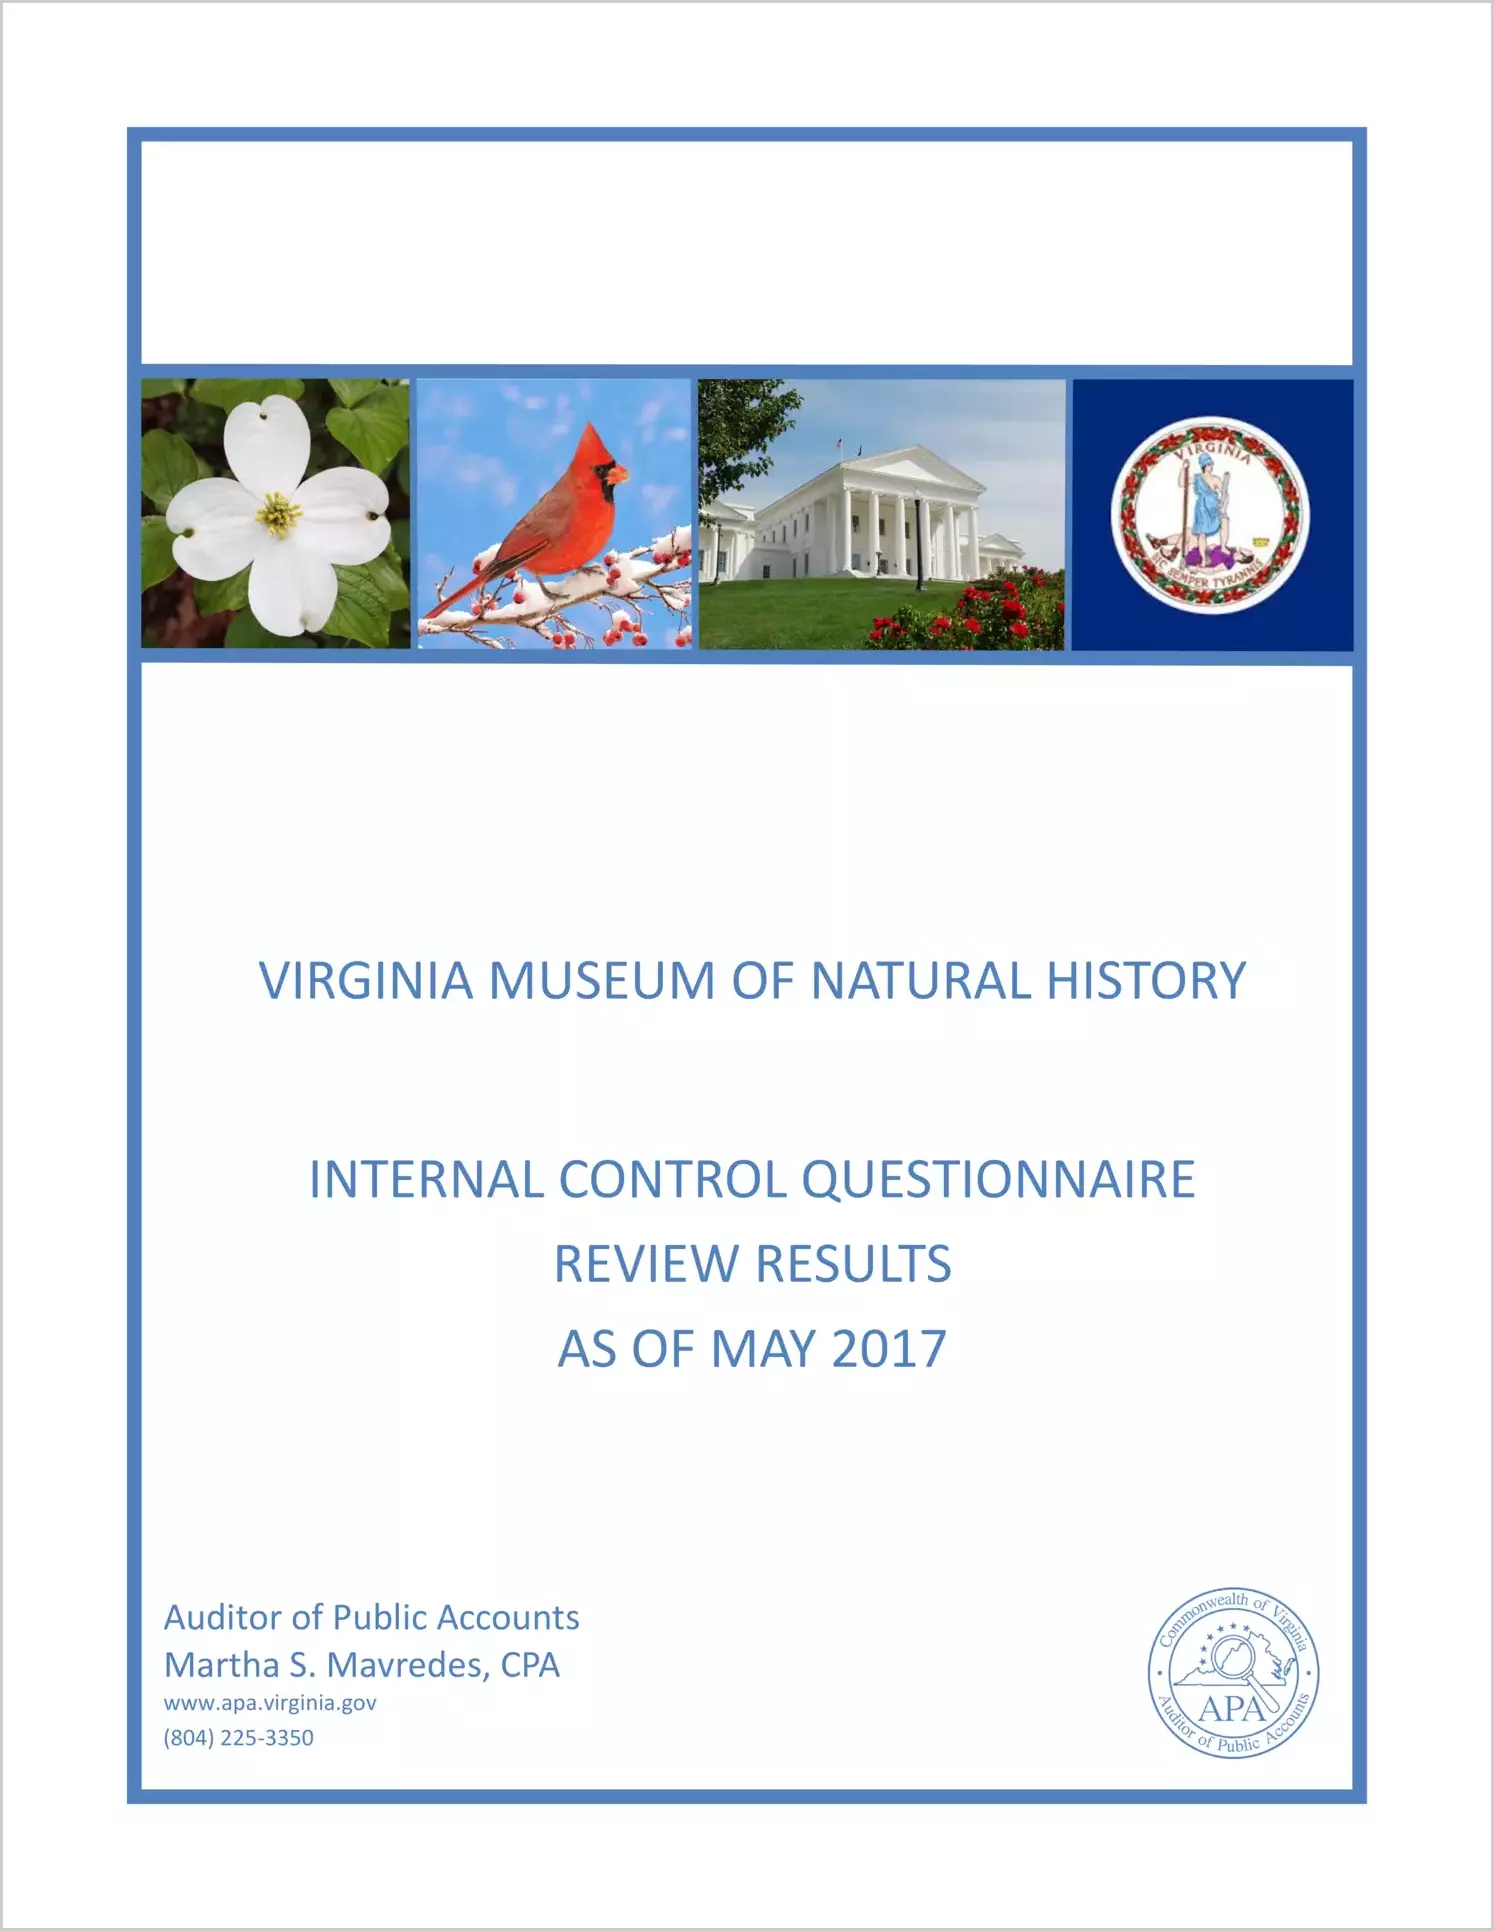 Virginia Museum of Natural History Internal Control Questionnaire Review Results as of May 2017